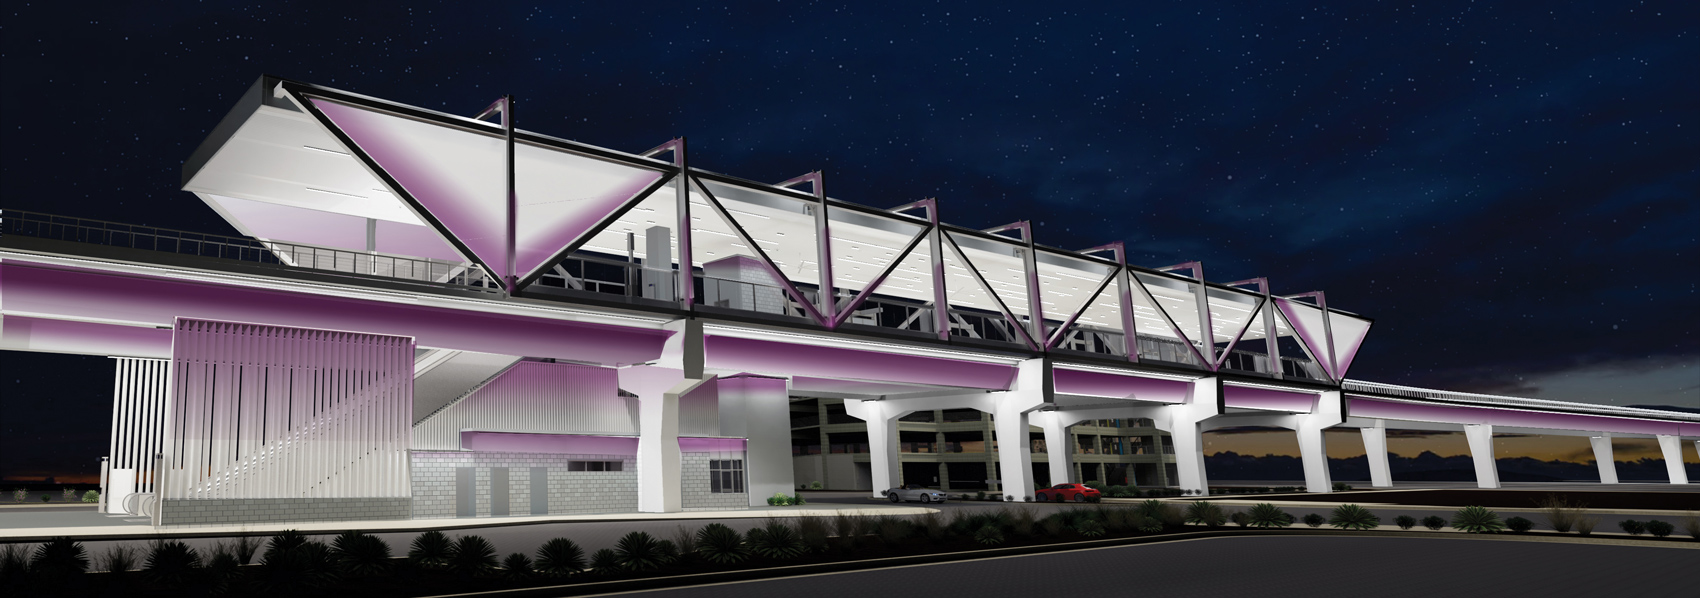 The rendering shows the future Metrocenter station (looking northeast). The station is elevated with geometric triangular shapes surrounding the light rail platform. The rendering is a nighttime view with purple accent lights. The color of the lights will be adjustable.